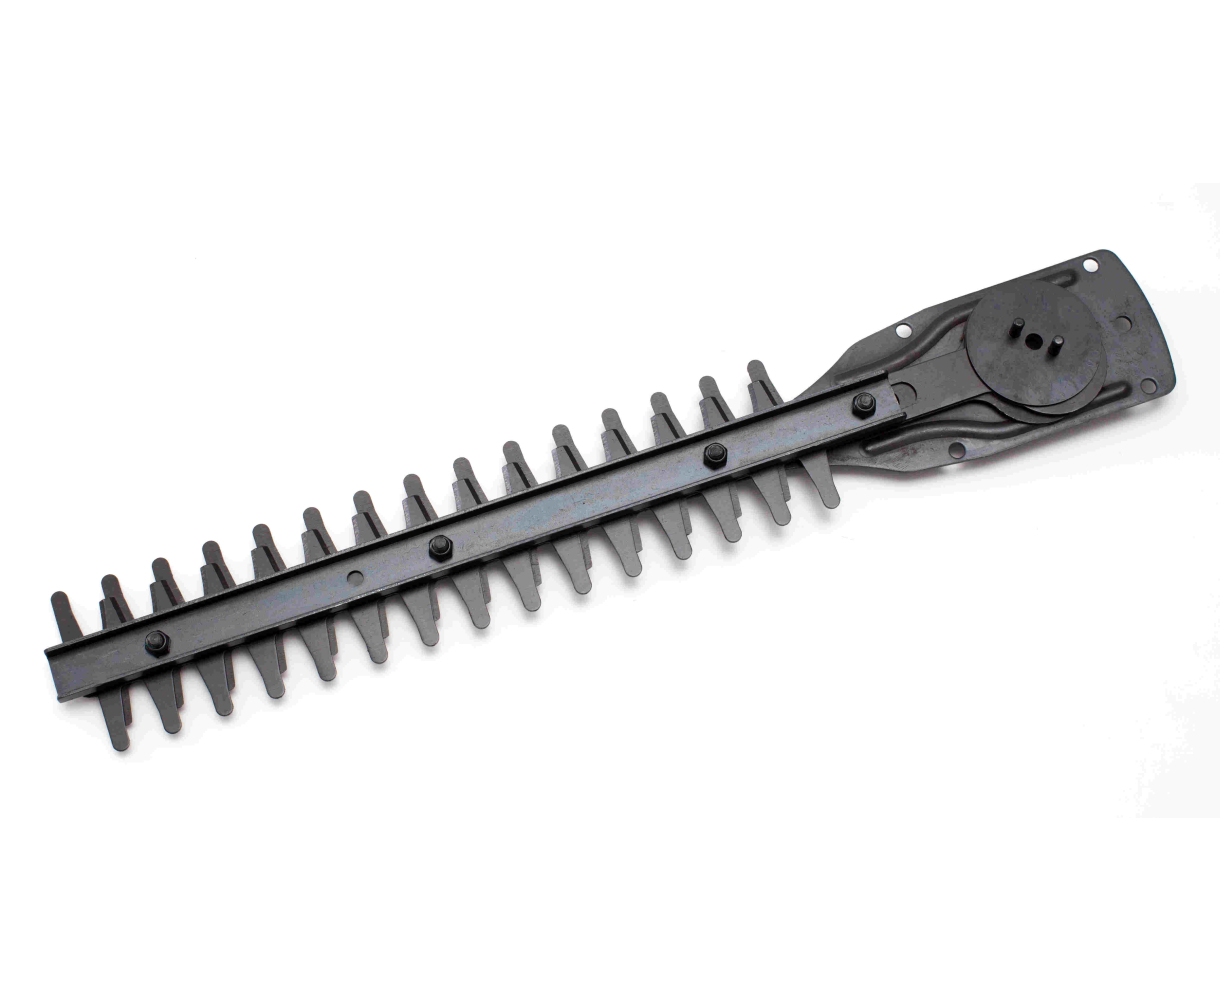 HT05 Plus Blade | Replacement Spares for your Hedge Trimmer | Gtech